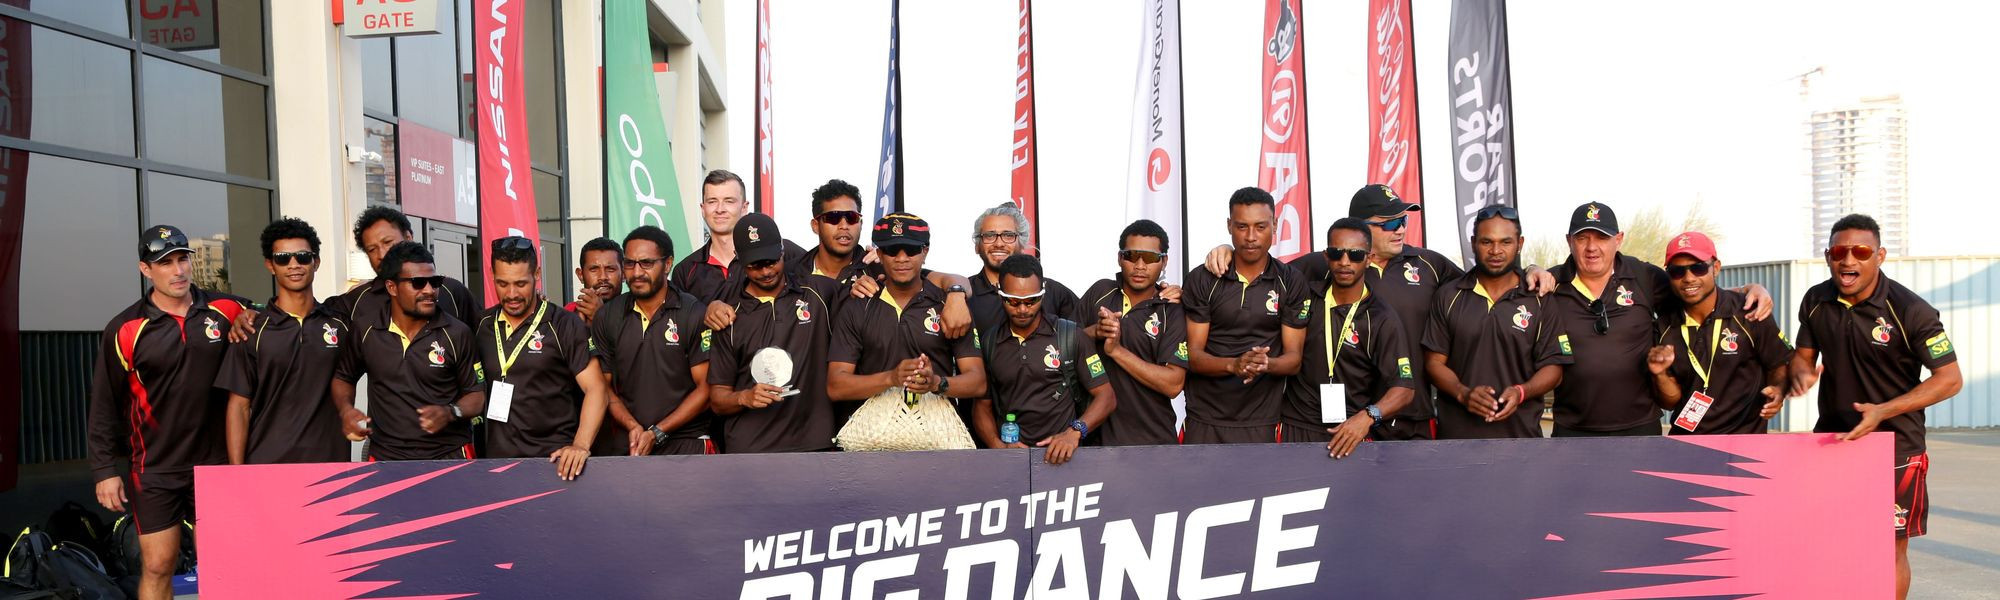 Papua New Guinea and Ireland qualify for ICC T20 World Cup